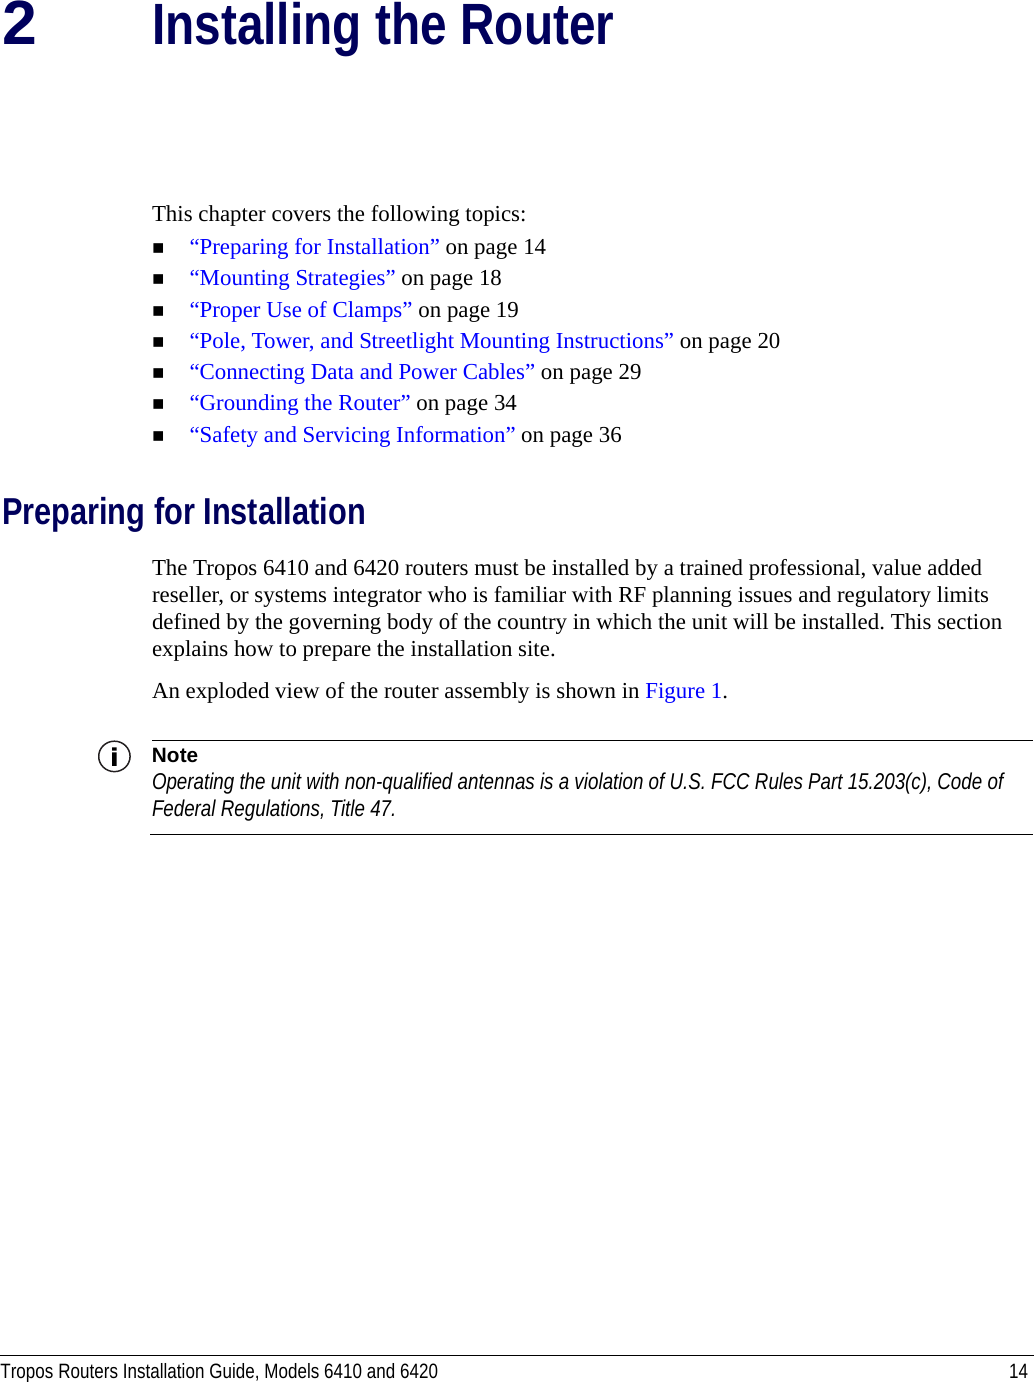 Tropos Routers Installation Guide, Models 6410 and 6420 142Installing the RouterThis chapter covers the following topics:“Preparing for Installation” on page 14“Mounting Strategies” on page 18“Proper Use of Clamps” on page 19“Pole, Tower, and Streetlight Mounting Instructions” on page 20“Connecting Data and Power Cables” on page 29“Grounding the Router” on page 34“Safety and Servicing Information” on page 36Preparing for InstallationThe Tropos 6410 and 6420 routers must be installed by a trained professional, value added reseller, or systems integrator who is familiar with RF planning issues and regulatory limits defined by the governing body of the country in which the unit will be installed. This section explains how to prepare the installation site.An exploded view of the router assembly is shown in Figure 1. NoteOperating the unit with non-qualified antennas is a violation of U.S. FCC Rules Part 15.203(c), Code of Federal Regulations, Title 47. 